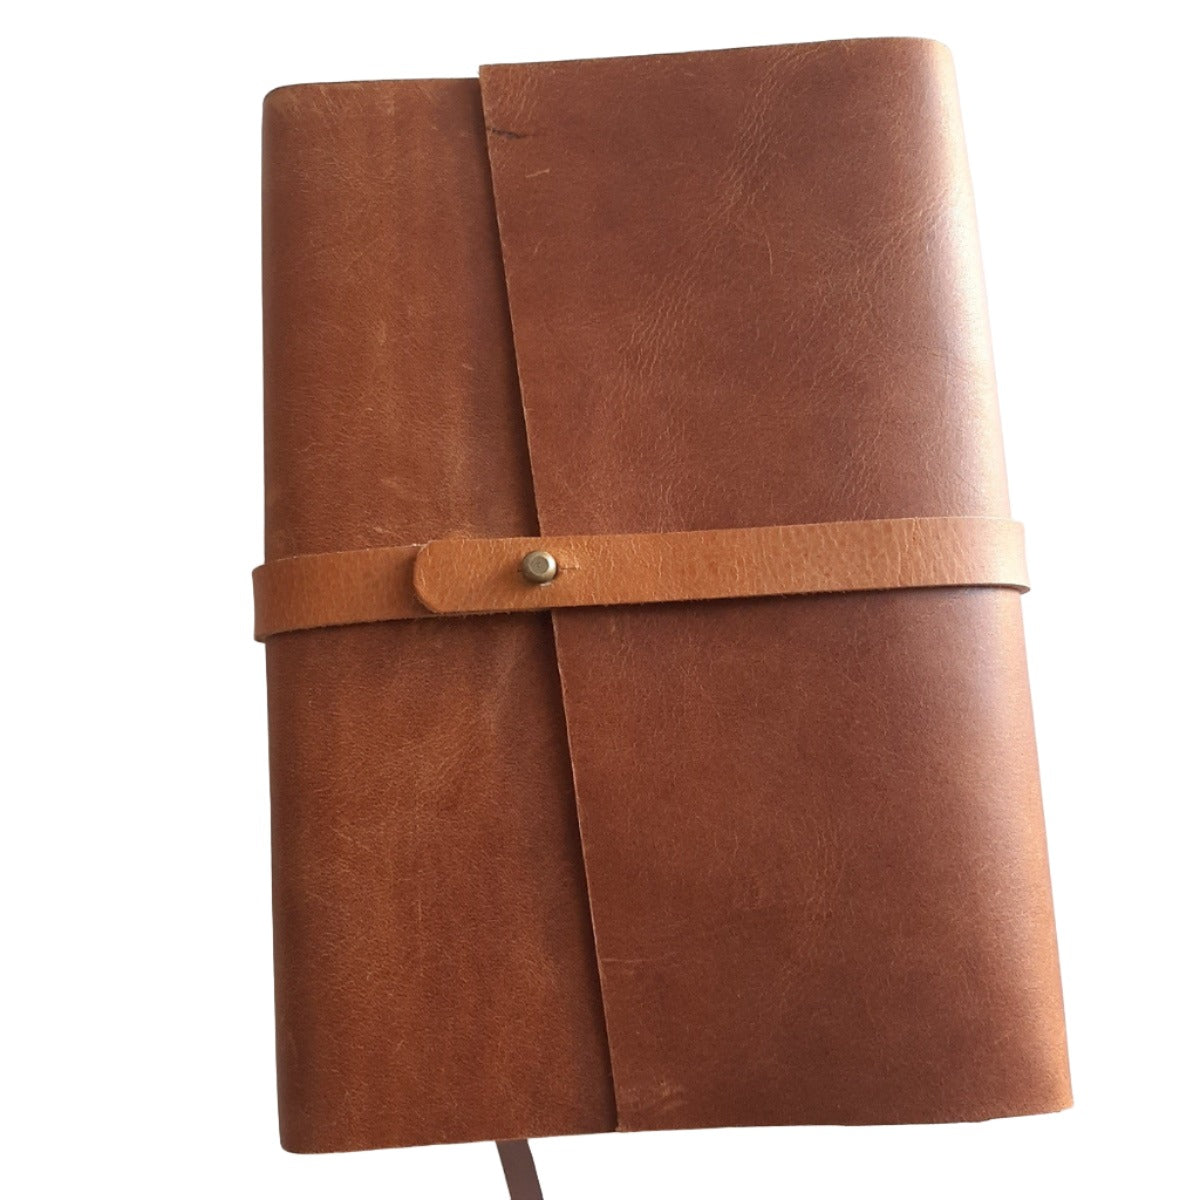 A5 executive book covers for notebooks and diary 